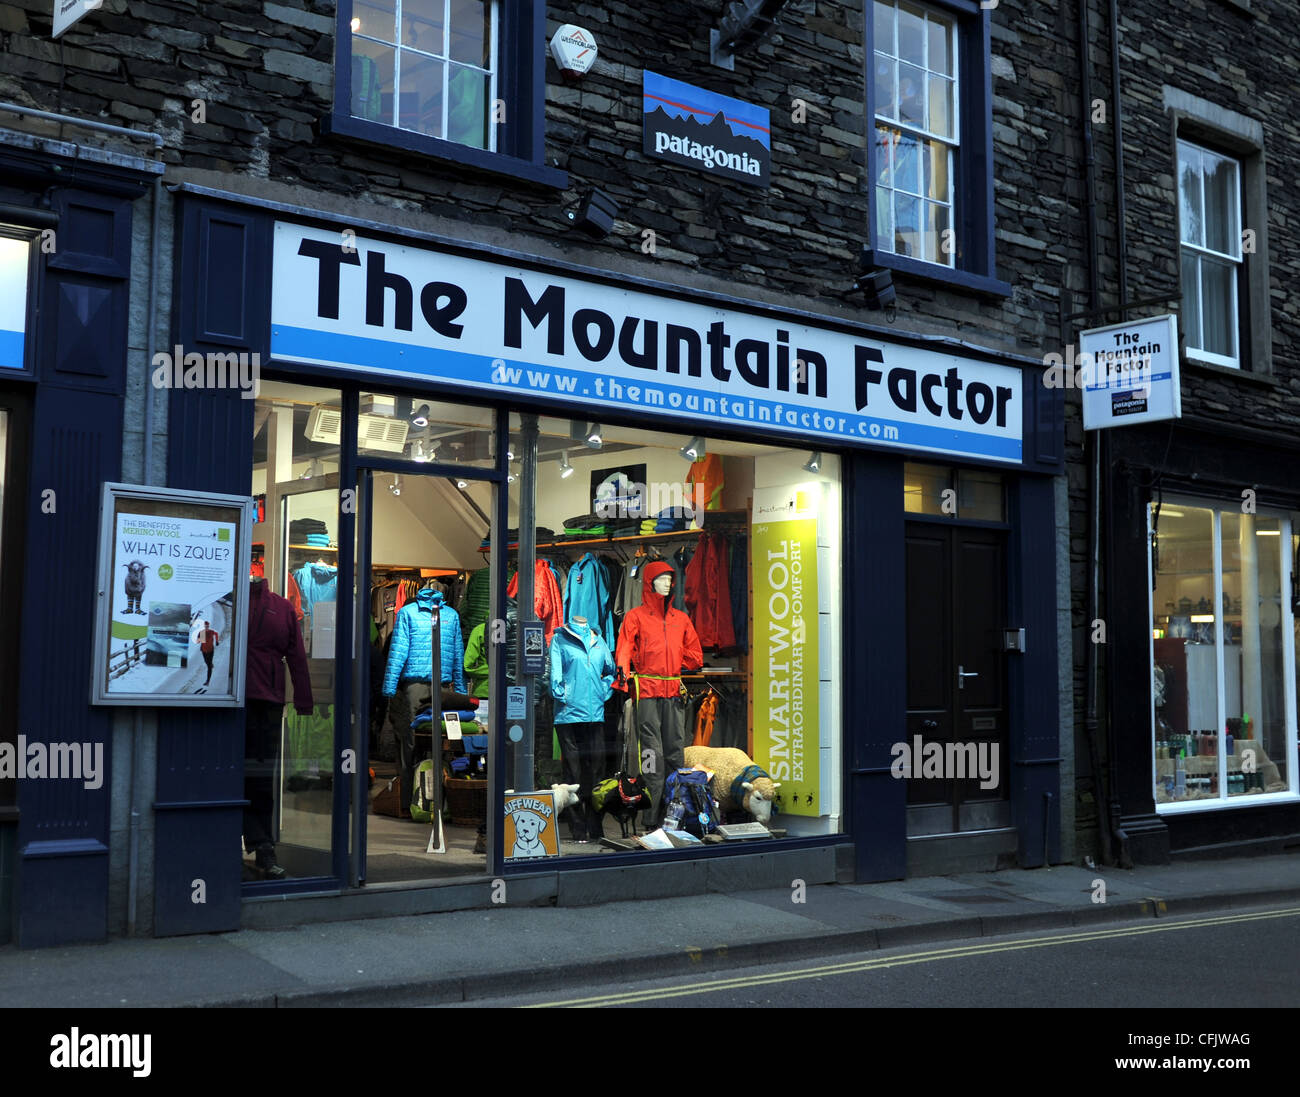 The Mountain Factor outdoor adventure clothing store at Ambleside in The Lake District Cumbria UK Stock Photo